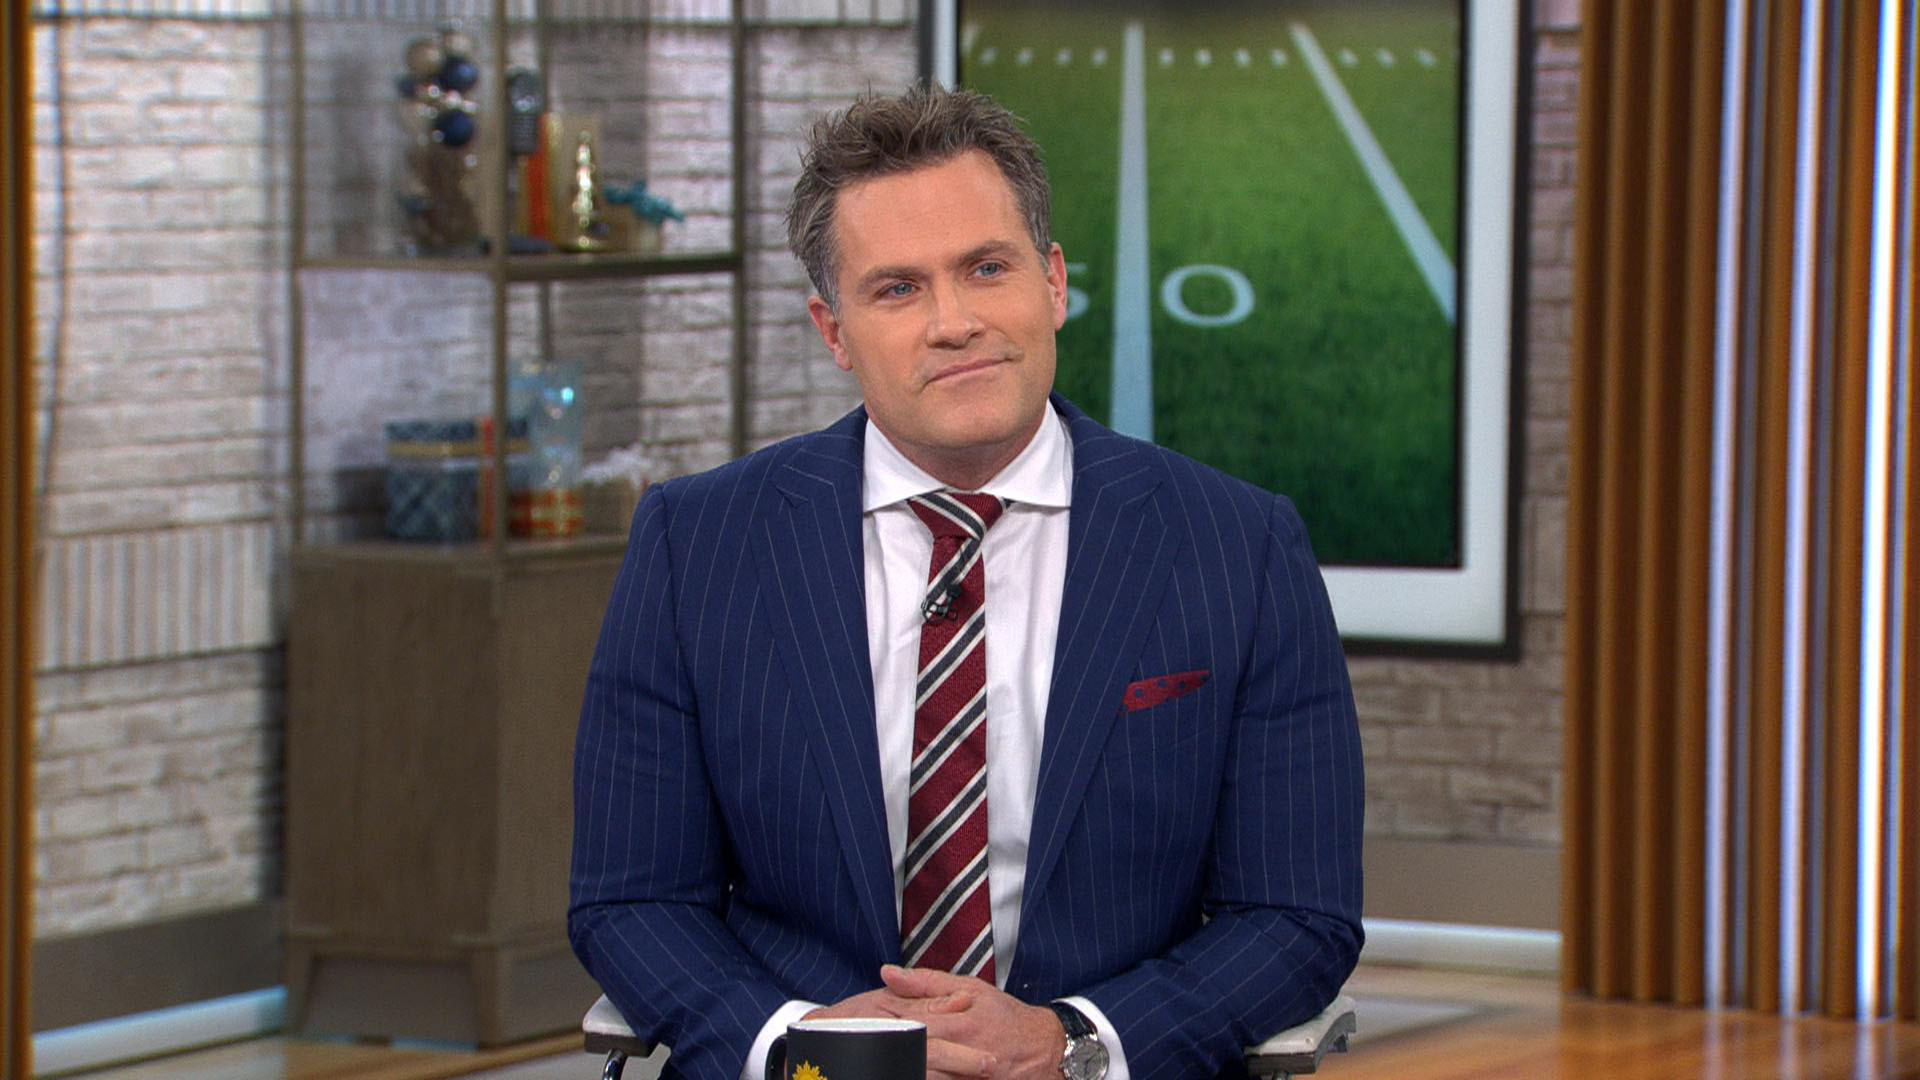 Watch CBS Mornings: NFL Network's Kyle Brandt on new